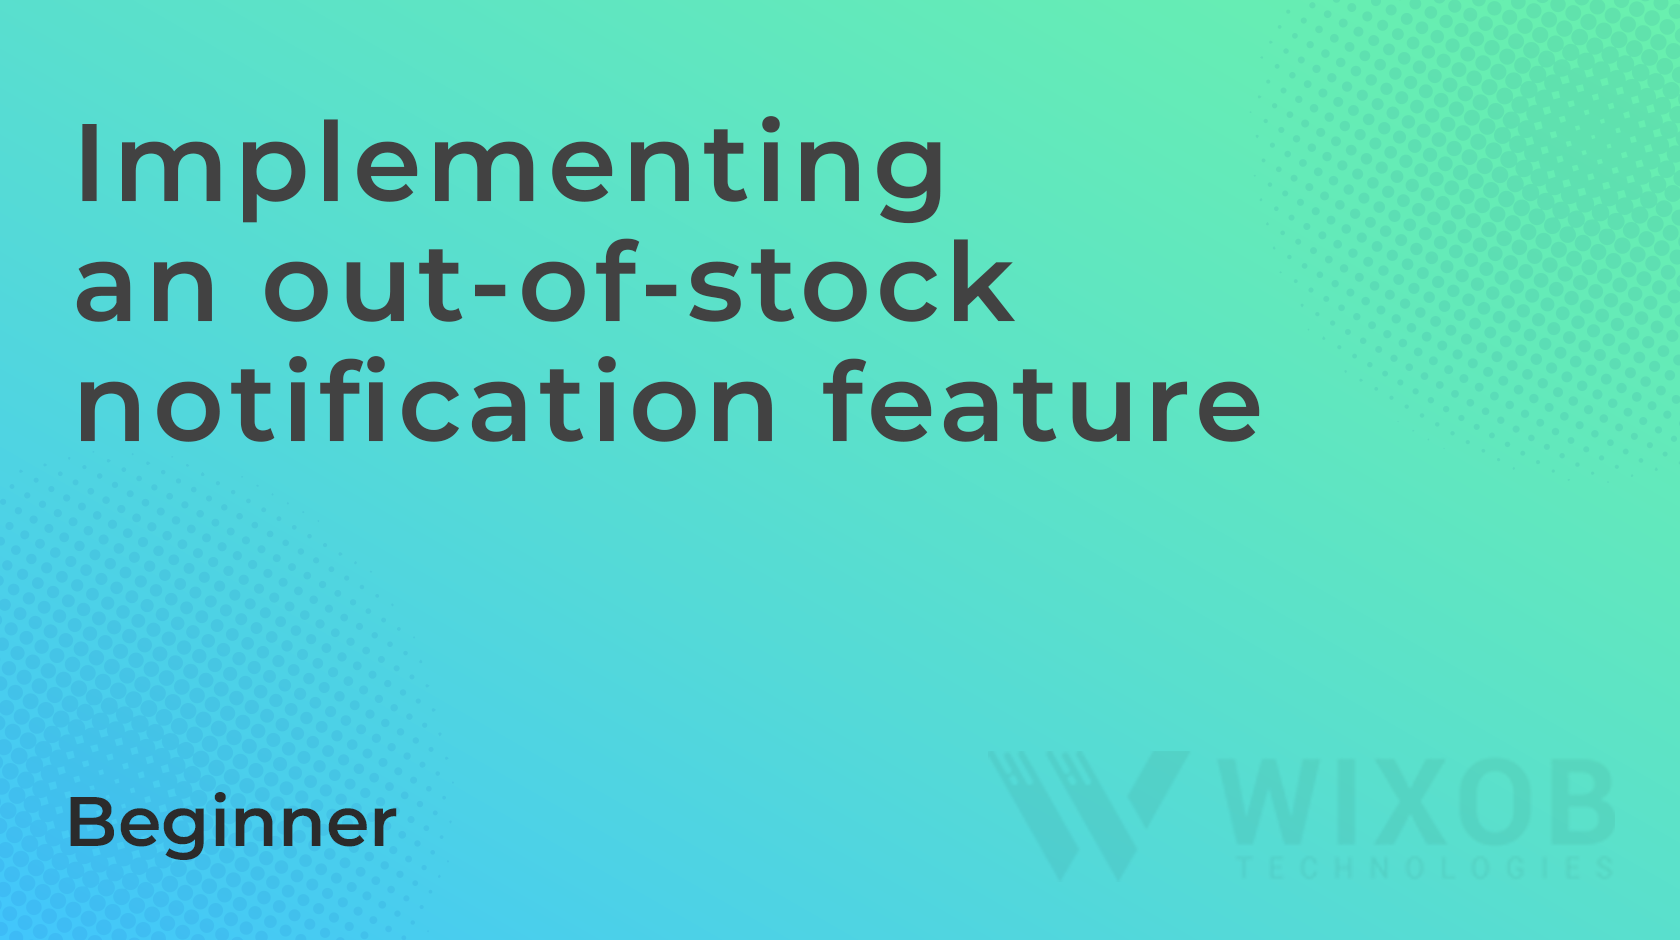 Implementing an out-of-stock notification feature